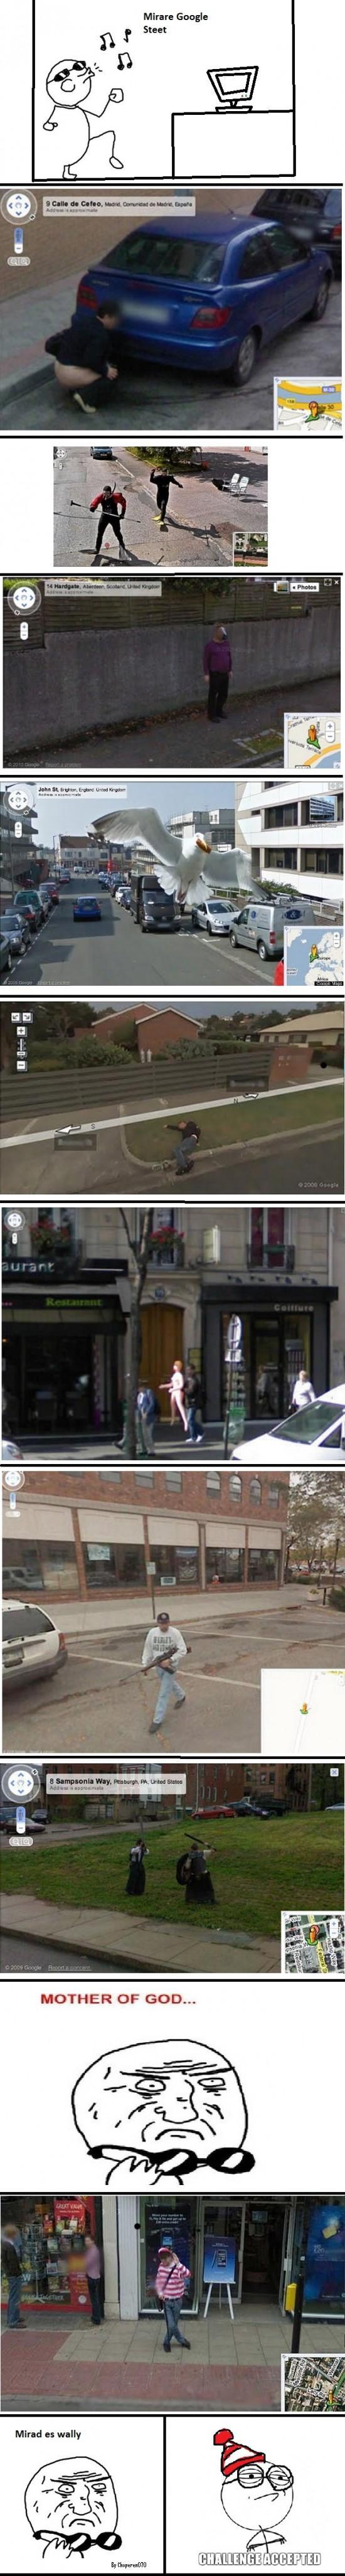 Mother of Street View - meme